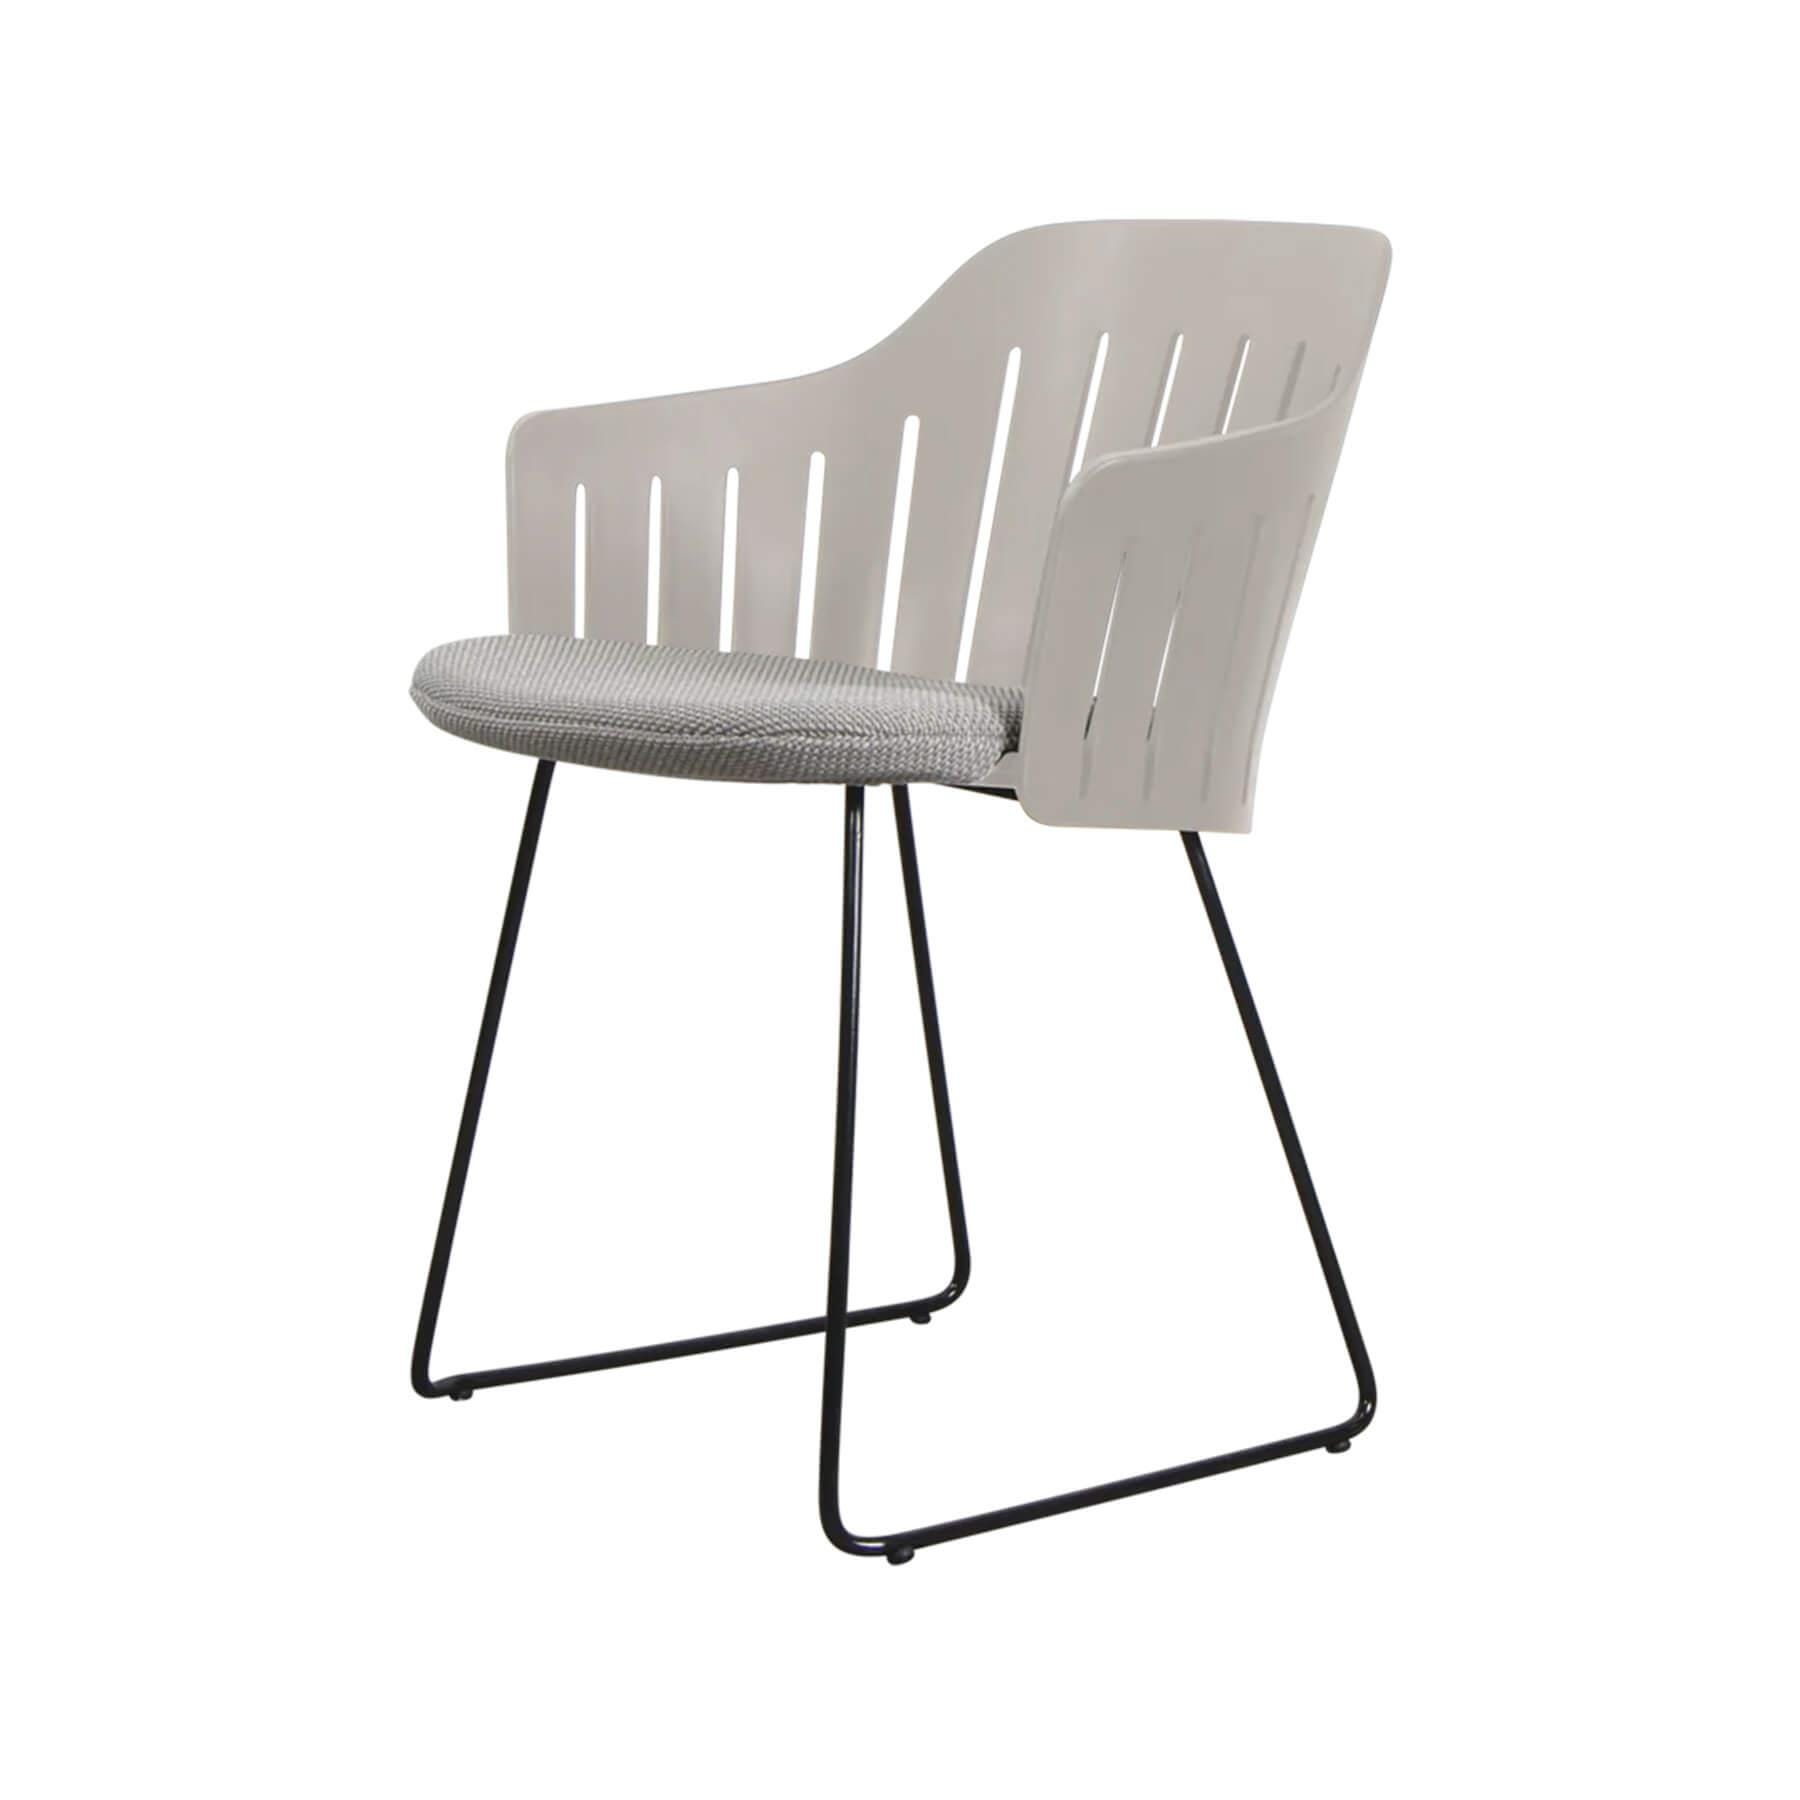 Caneline Choice Outdoor Chair With Steel Sled Legs Taupe Seat Light Grey Cushion Brown